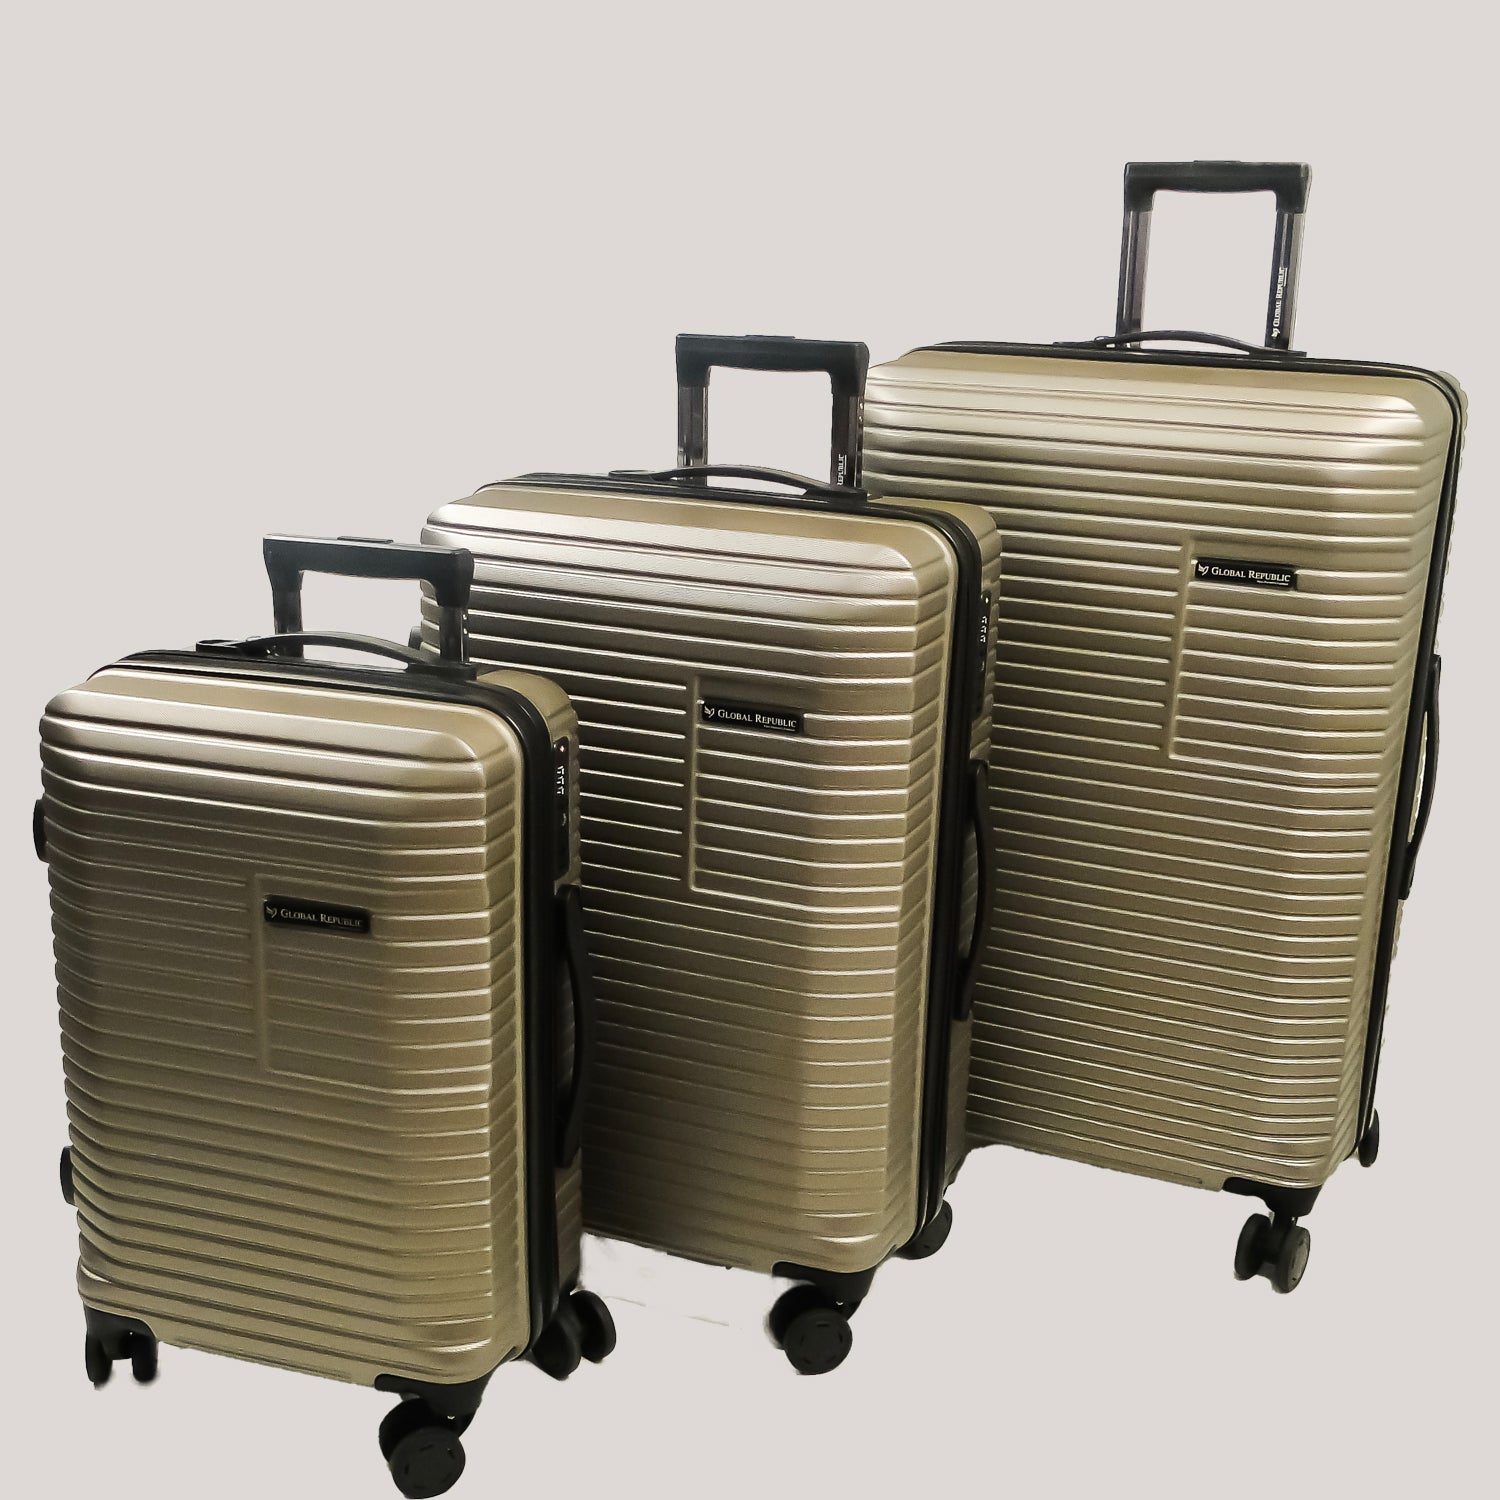 Set of 3 Light Polycarbonate Trolley Luggage Bags (Small, Medium and Large) - Gold Color